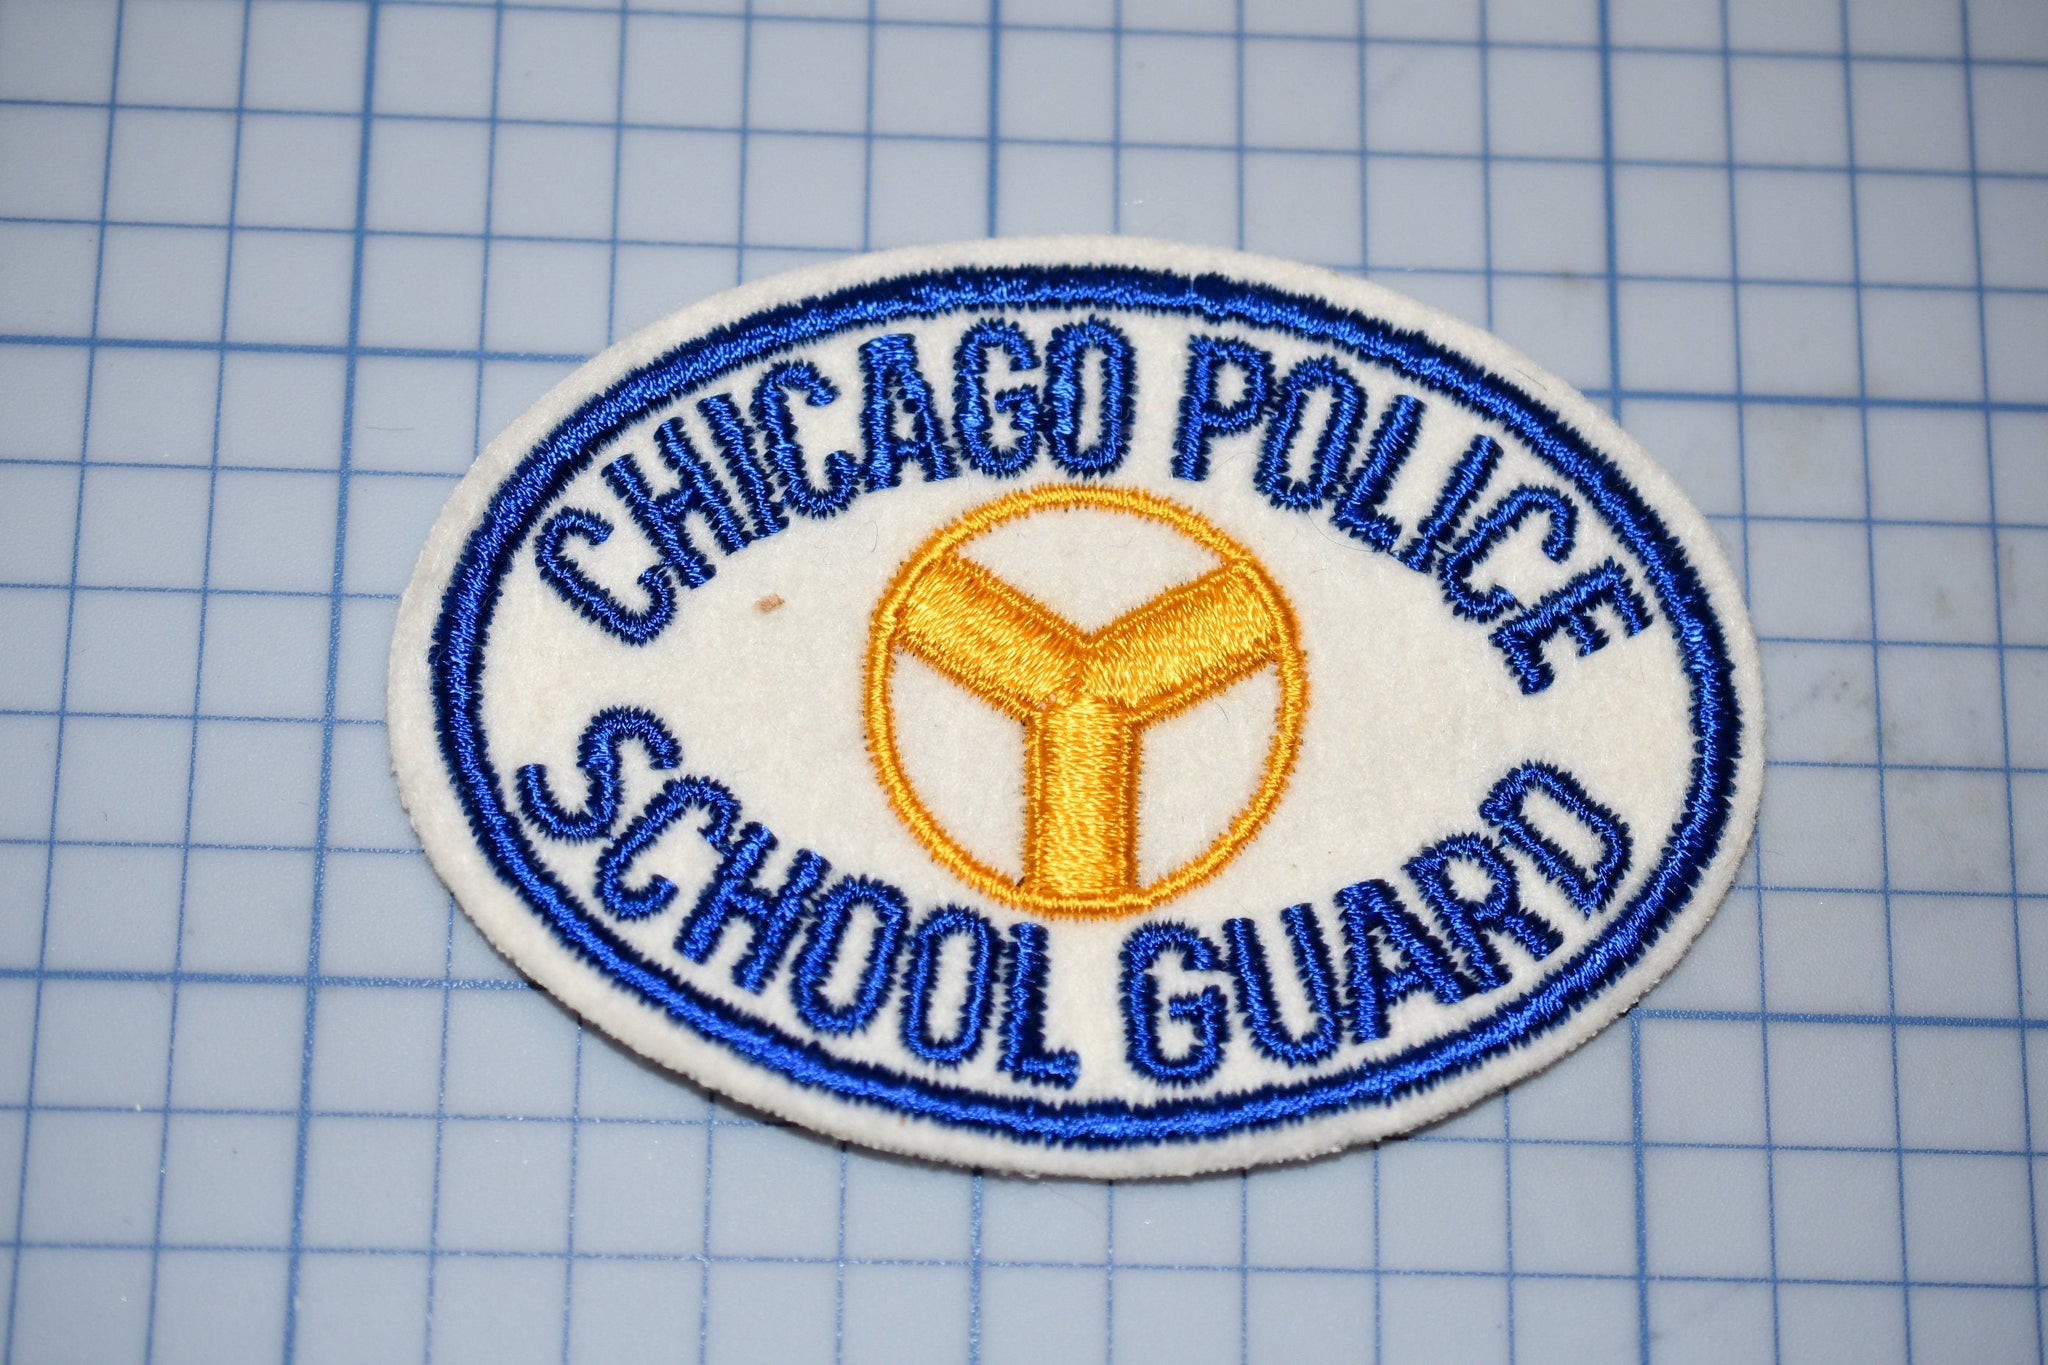 Chicago Illinois Police School Guard Patch (S4-295)